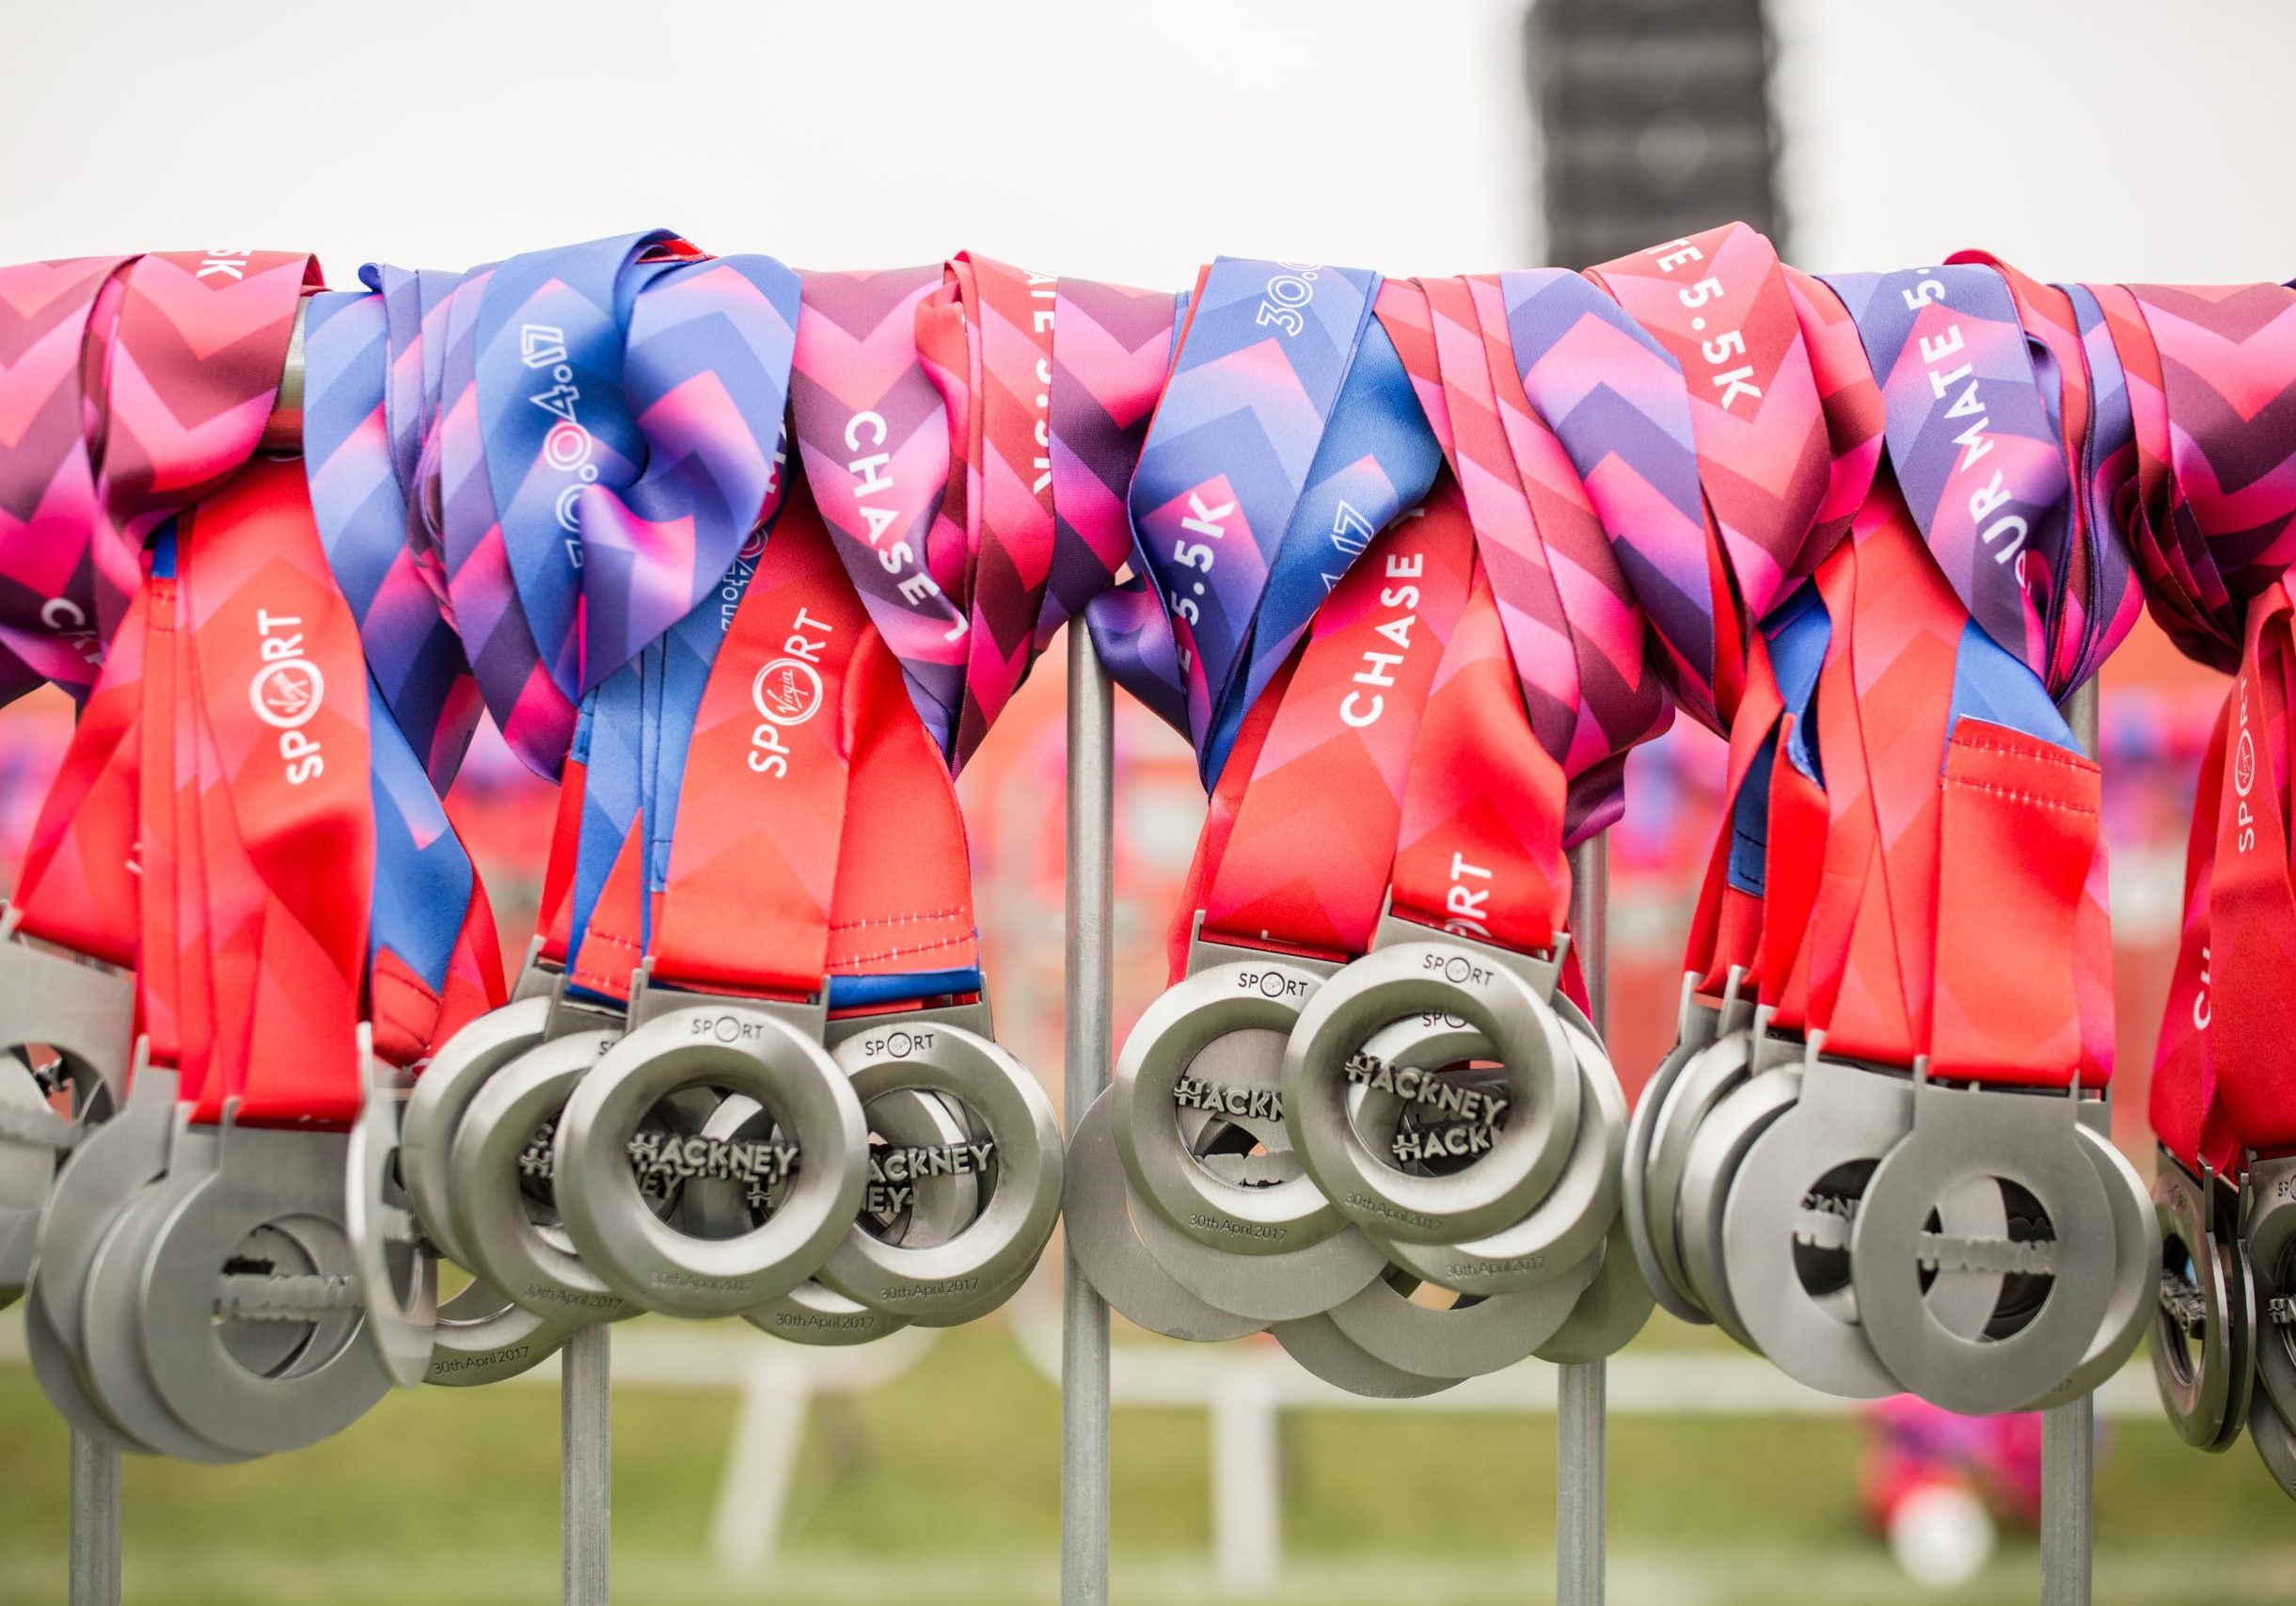 Hackney medals with red lanyards